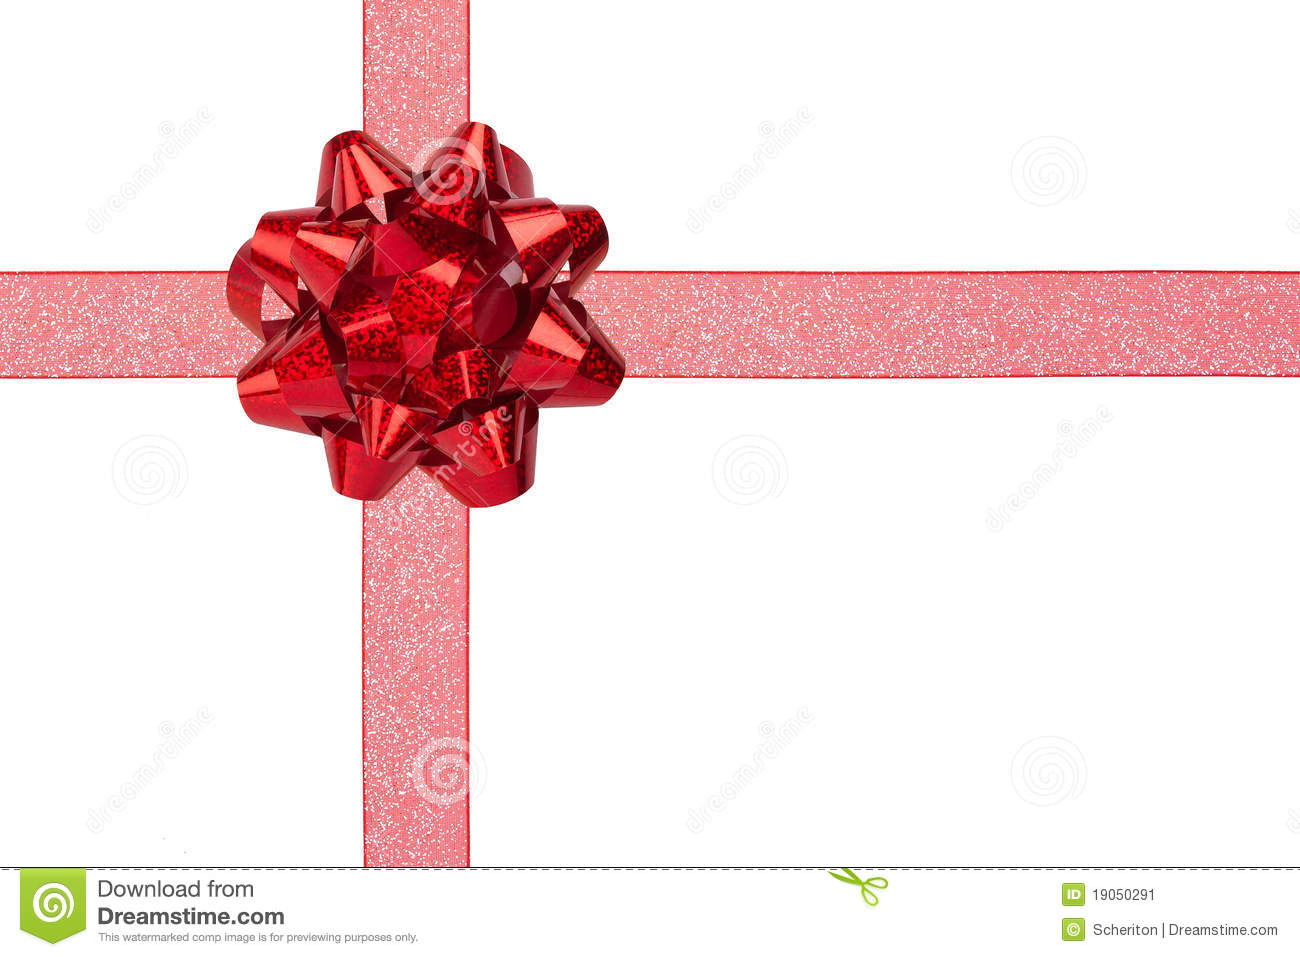 Gift Wrap With Red Sparkly Ribbon And Bow Stock Image   Image